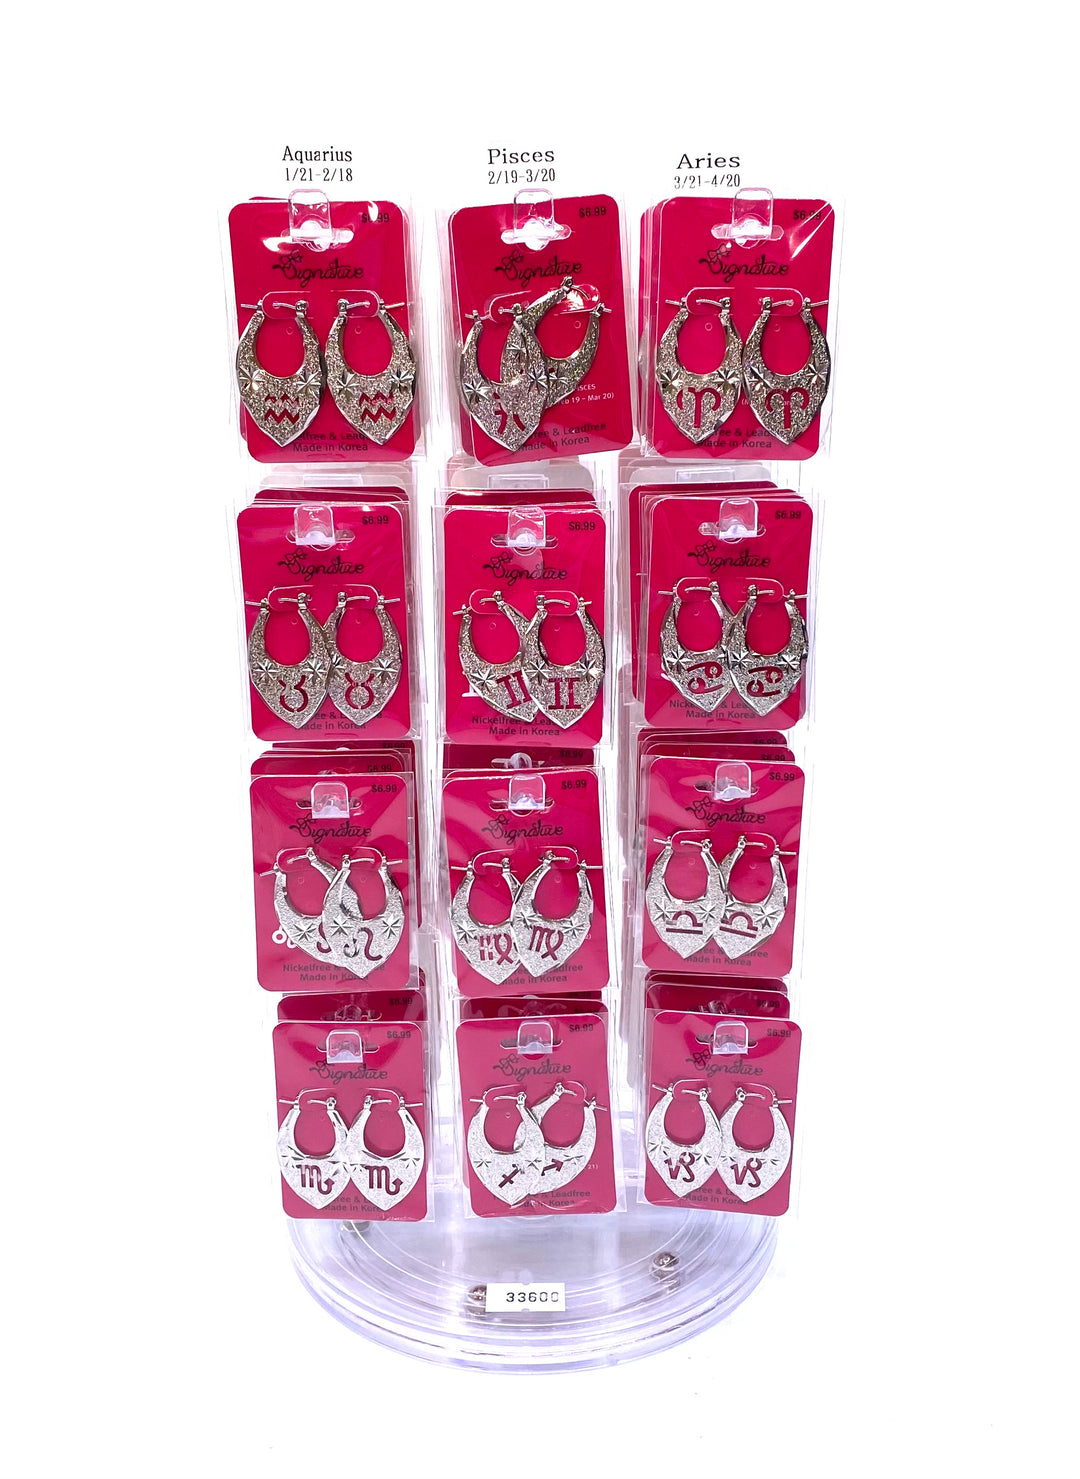 DISPLAY 96 Pair Earring Zodiac Metal Gold Silver PICK UP ONLY